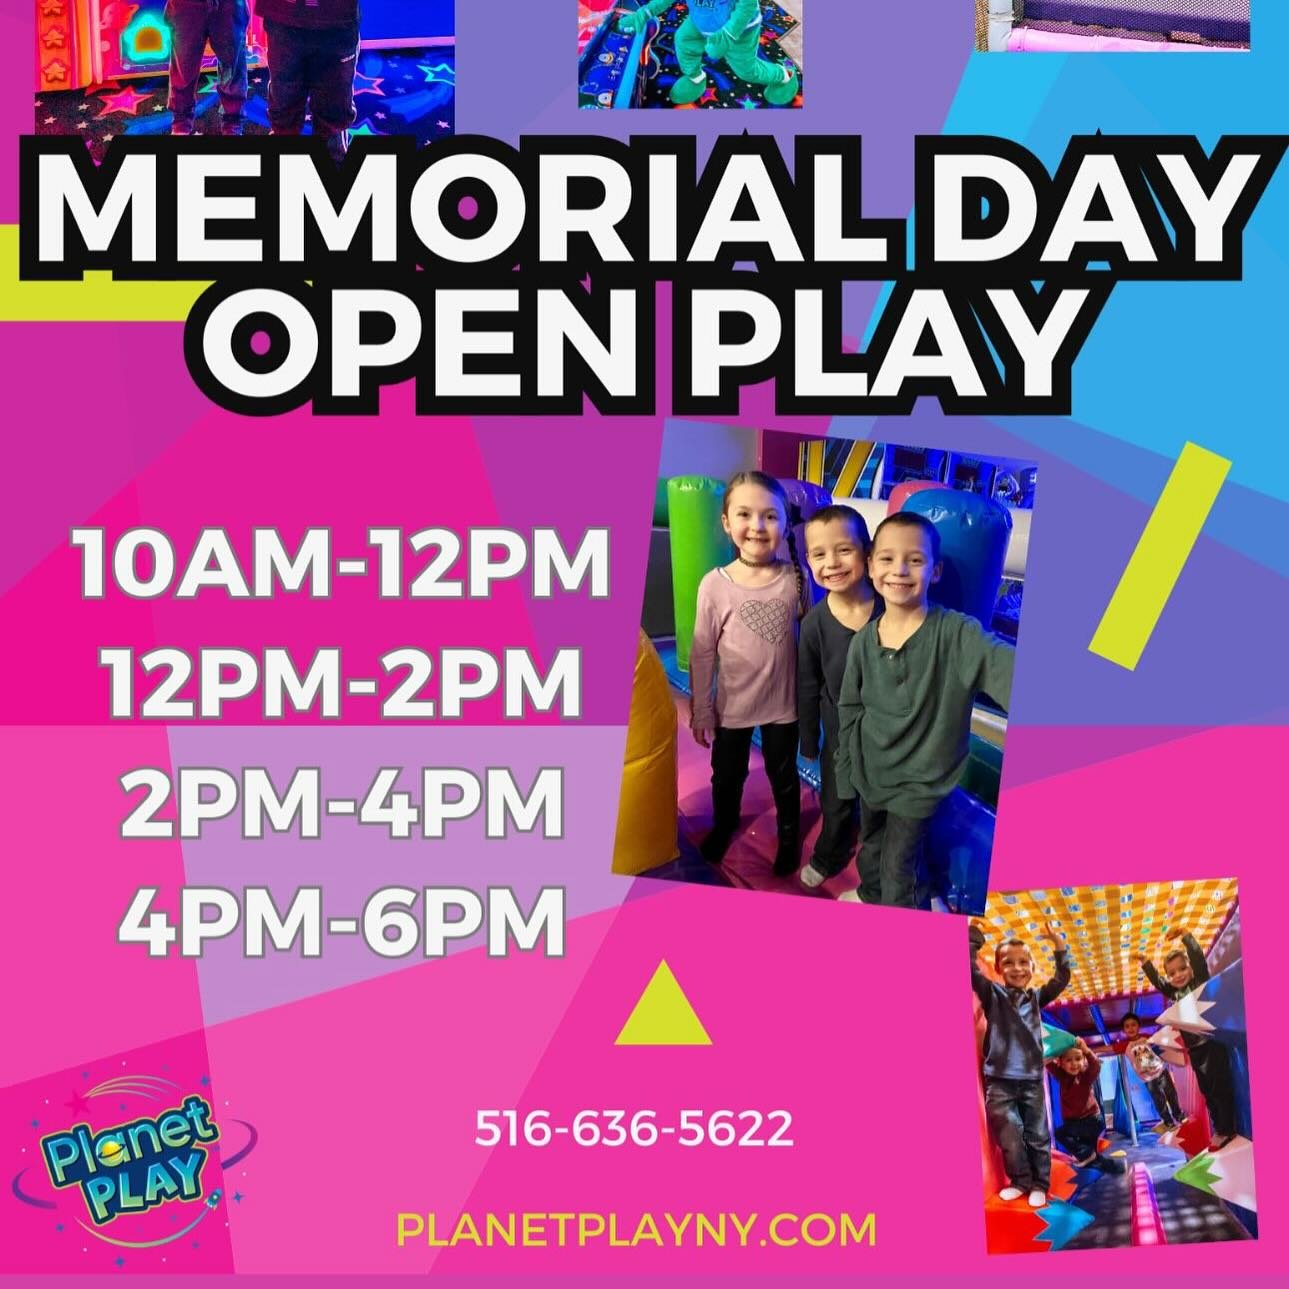 Tomorrow is a rainy day! Make your reservations for open play now!